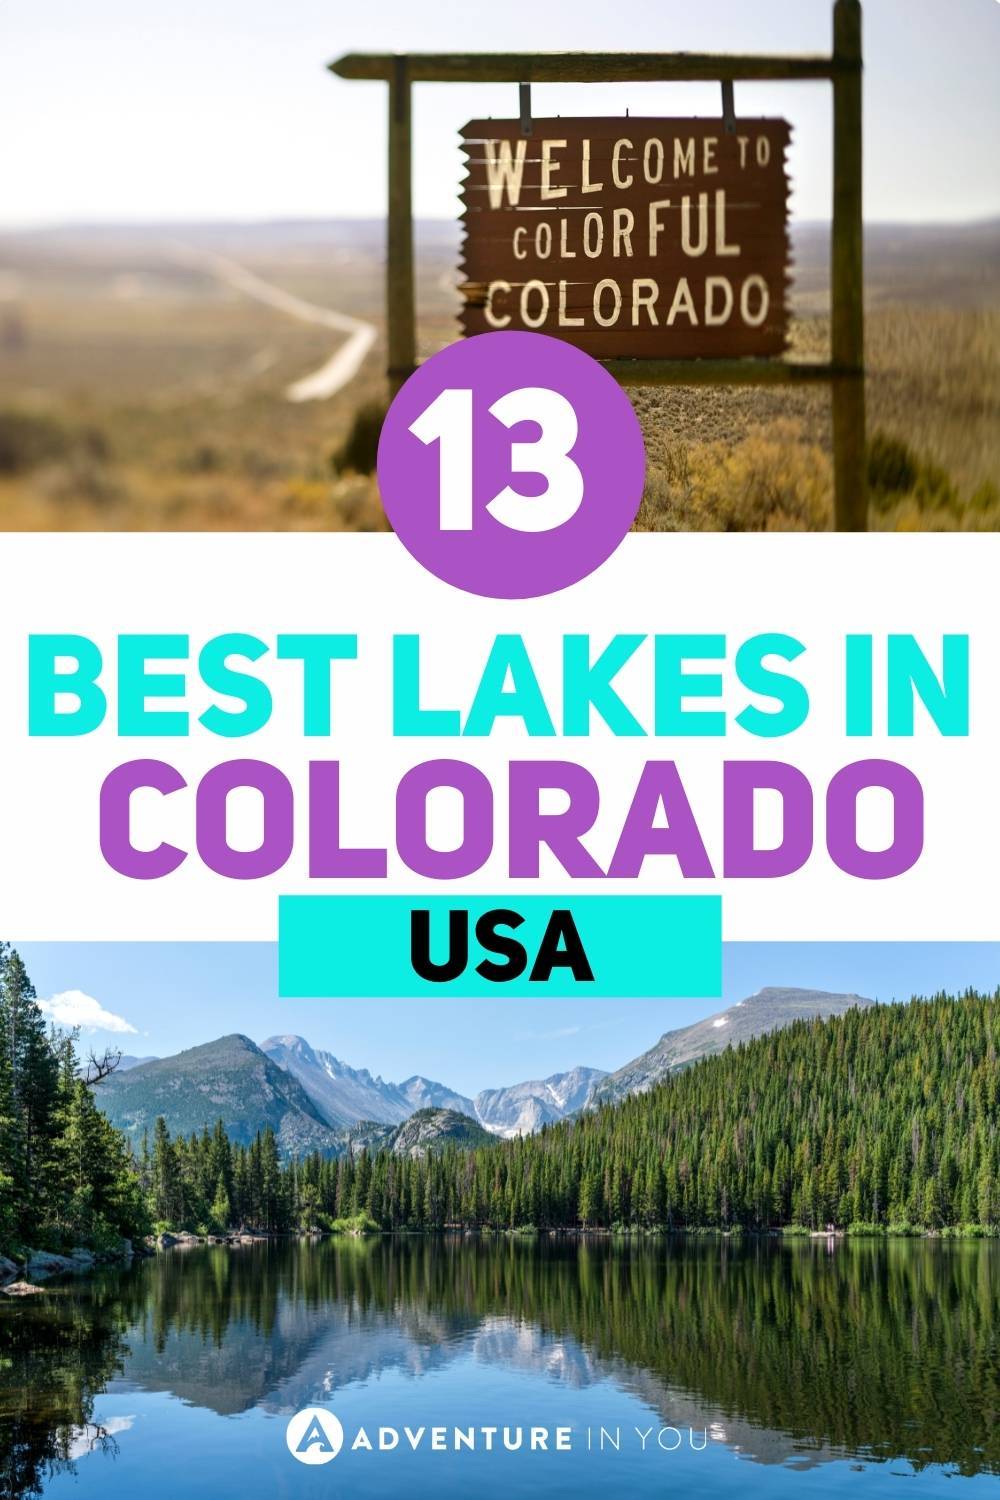 Best Lakes in Colorado | Looking for the best places to visit in Colorado? Here are our top choices for the best lakes in Colorado for swimming, boating, camping, and fishing. #usa #colorado #thingstodoincolorado